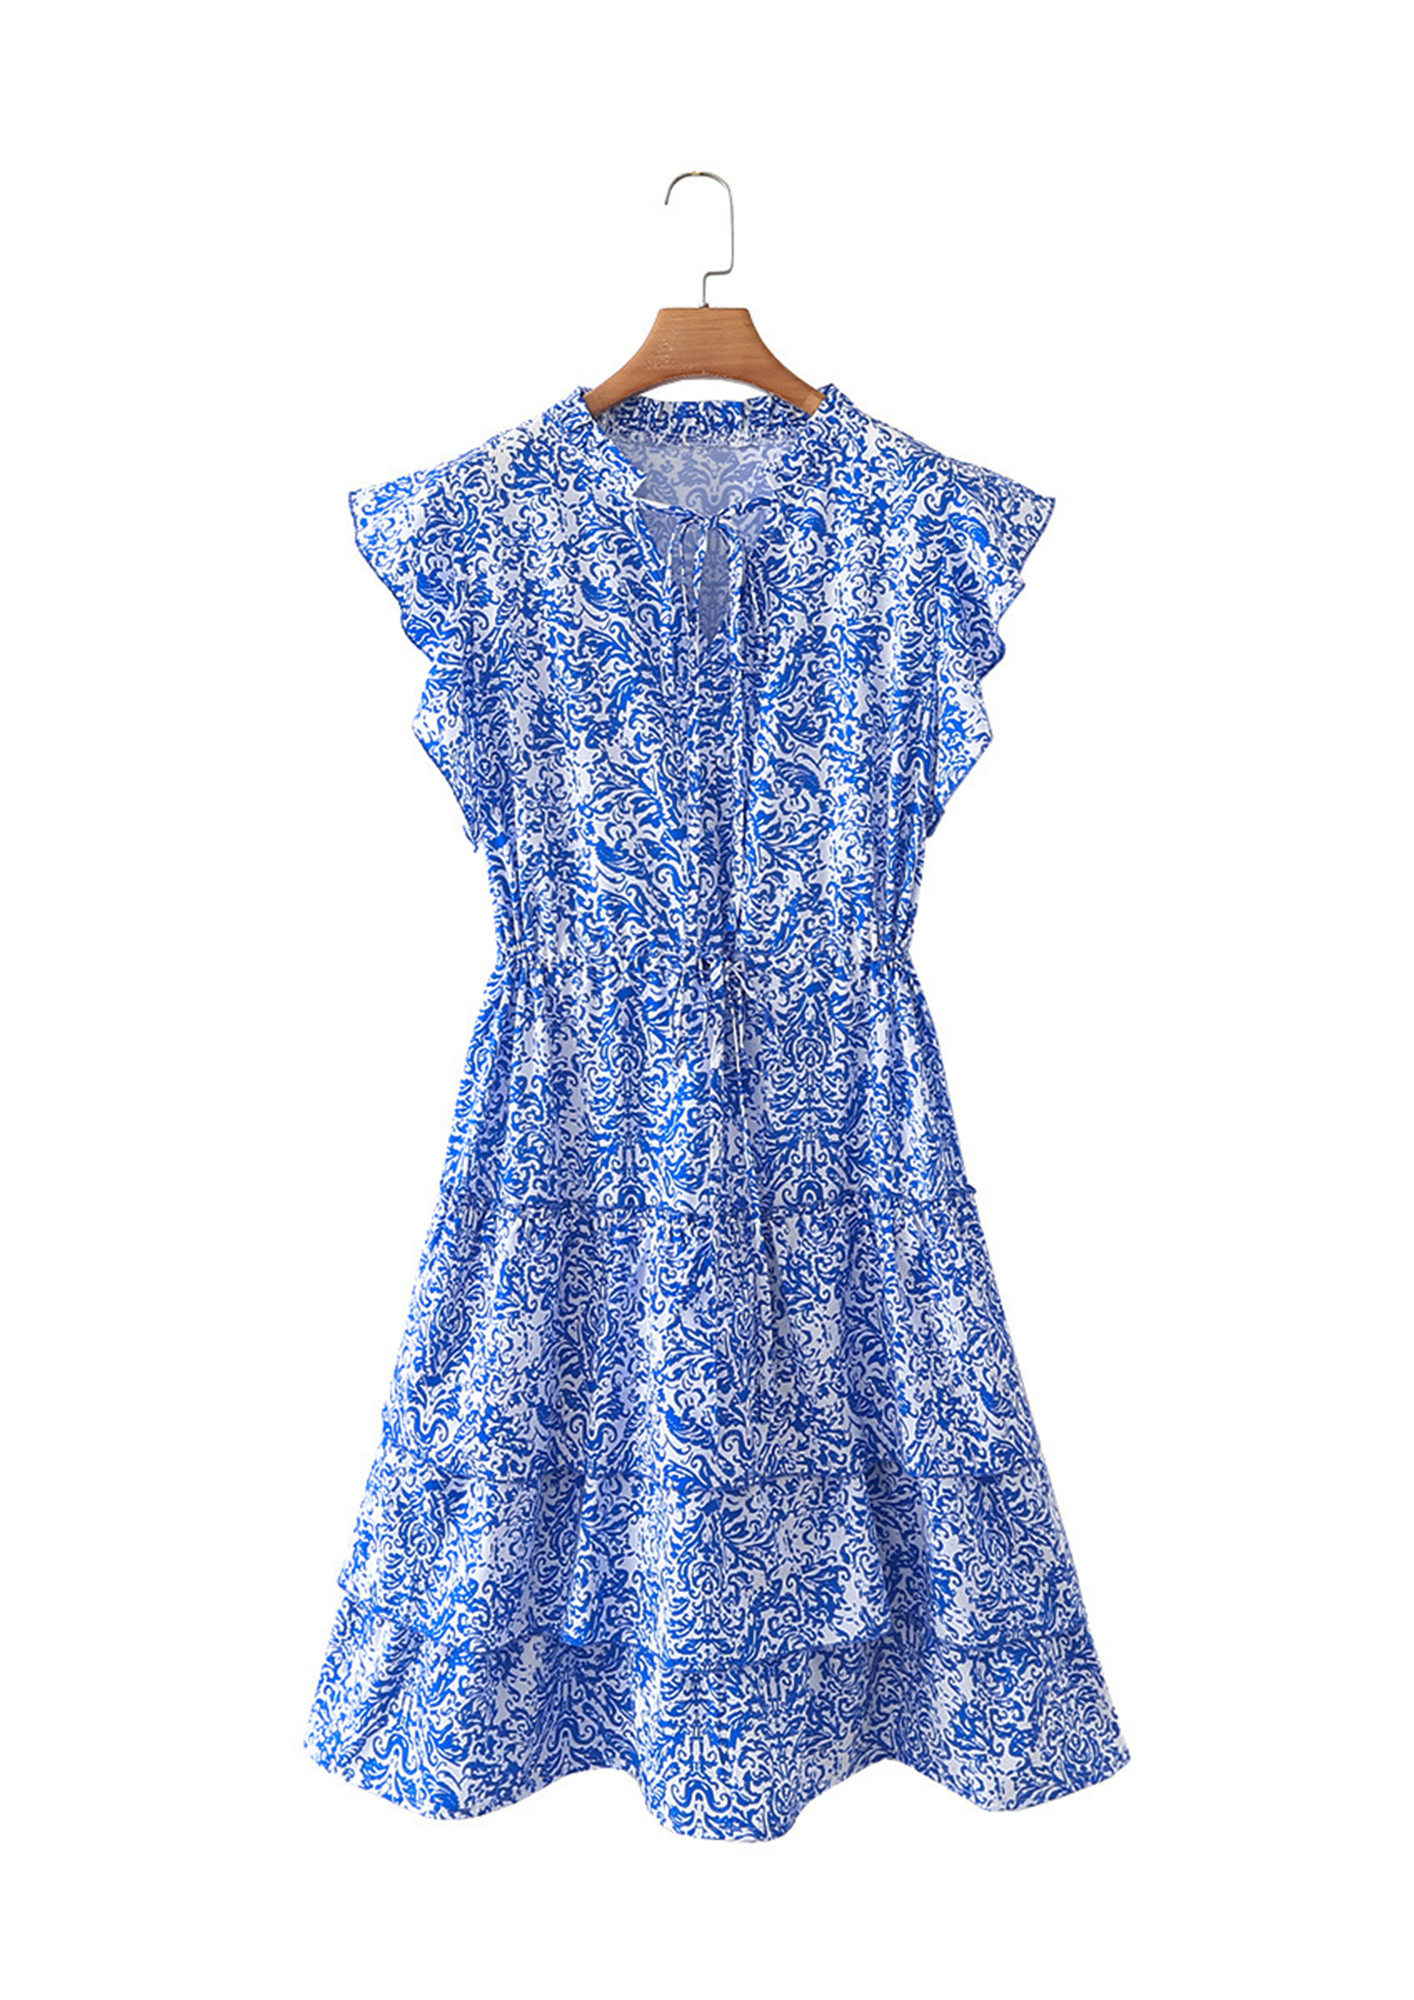 INTO THE BLUES SKATER DRESS